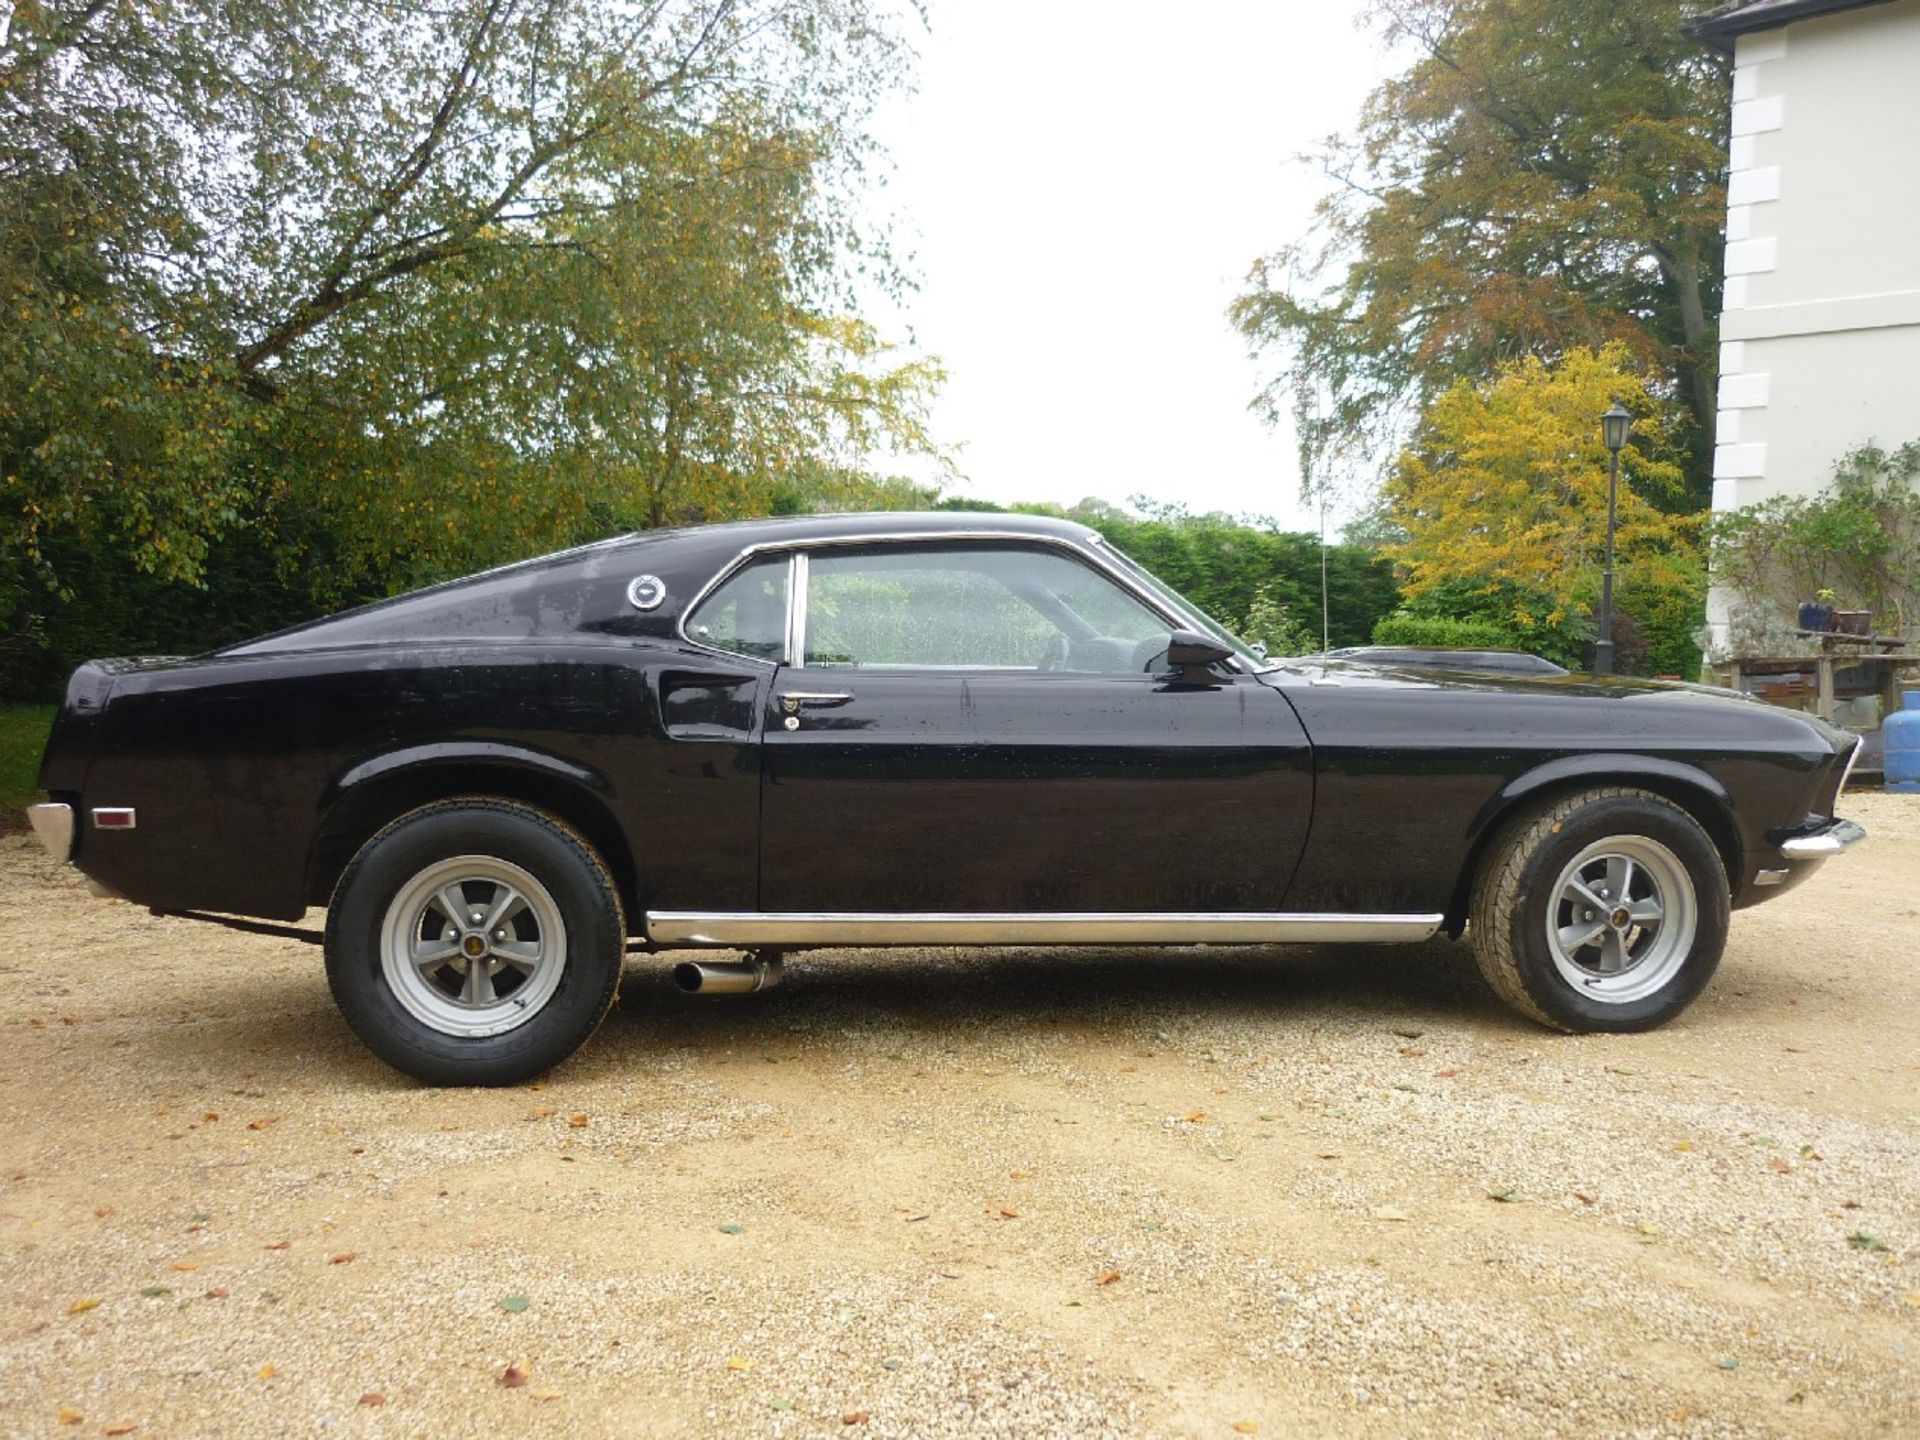 A 1969 Ford Mustang Fastback 351, registration number BWA 691G, chassis number 9T02H185415, black - Image 5 of 6